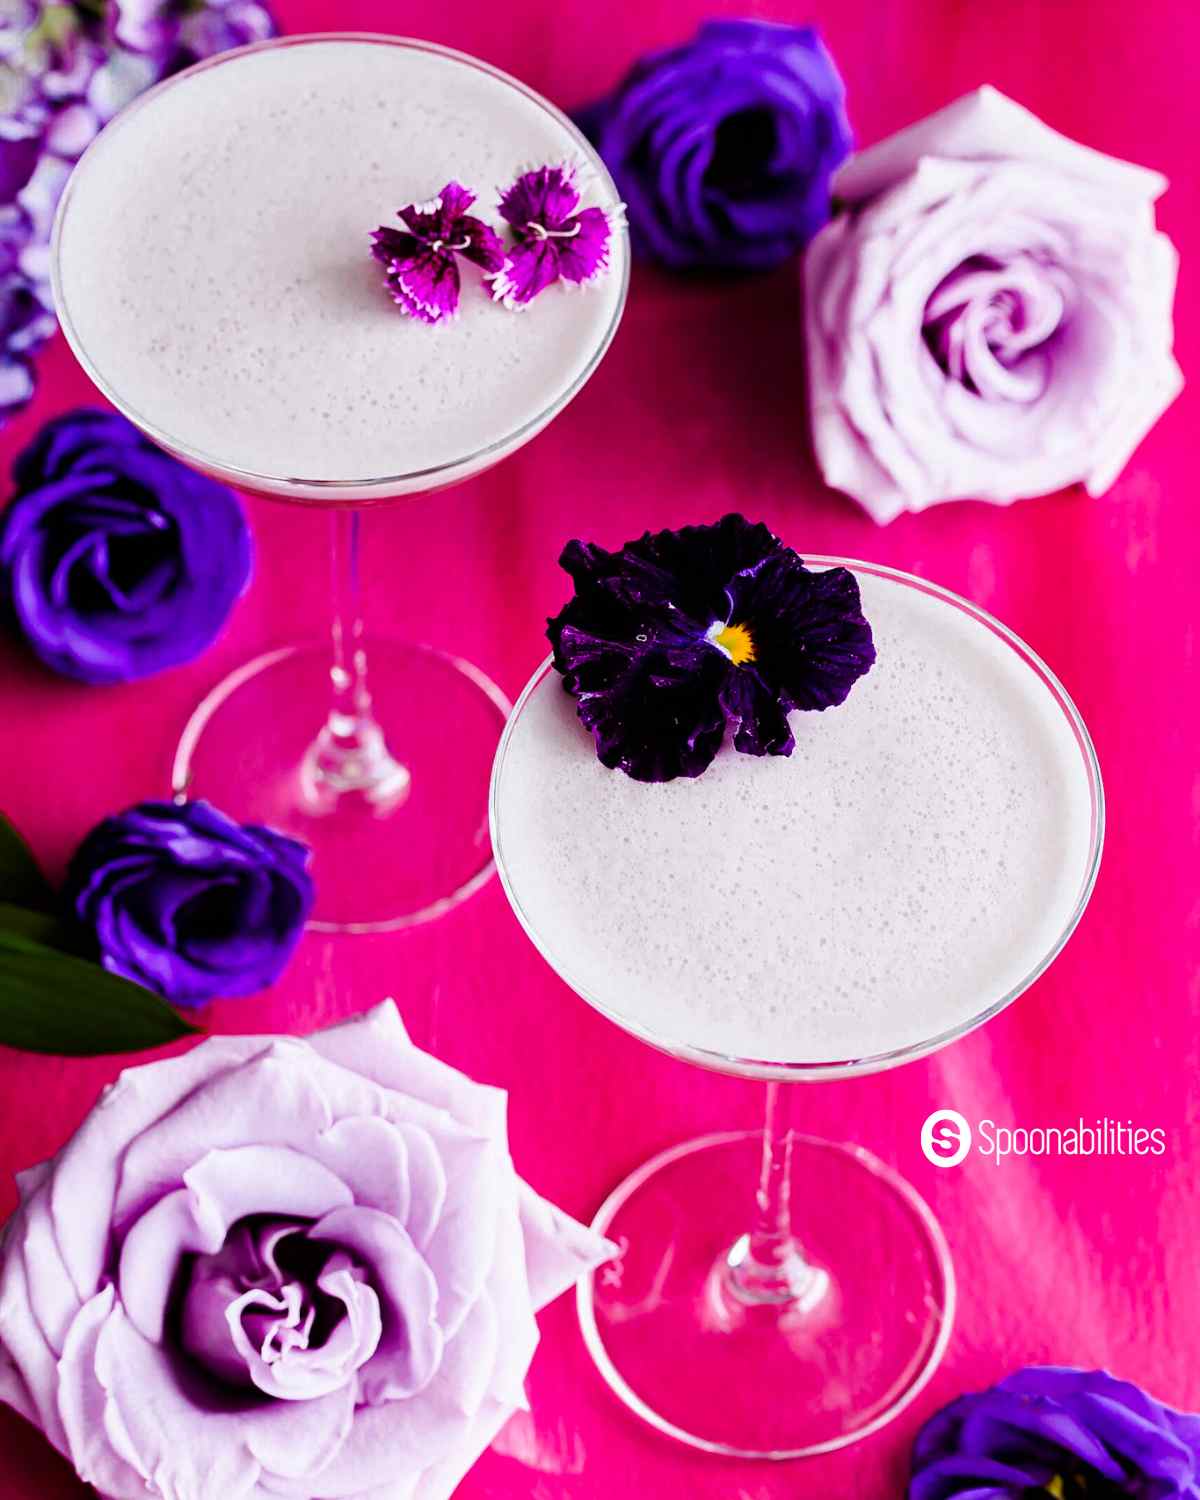 Top view of gin violette cocktail showing the rich white froth and flower garnish